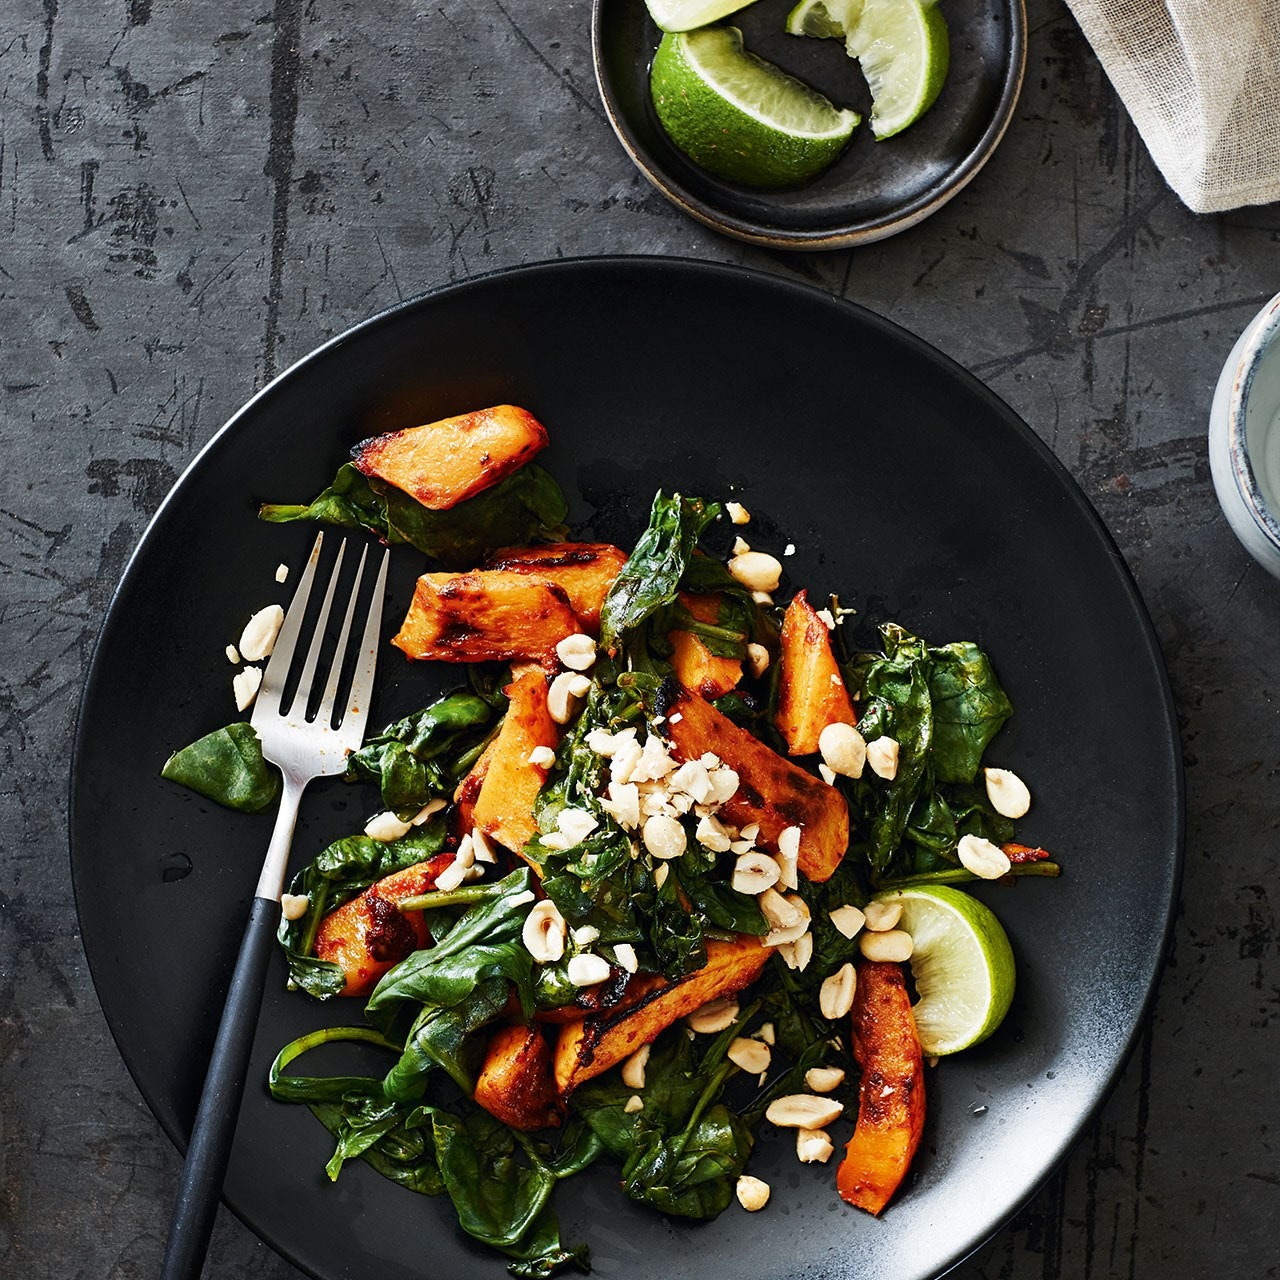 Korean-style roasted butternut squash and spinach salad